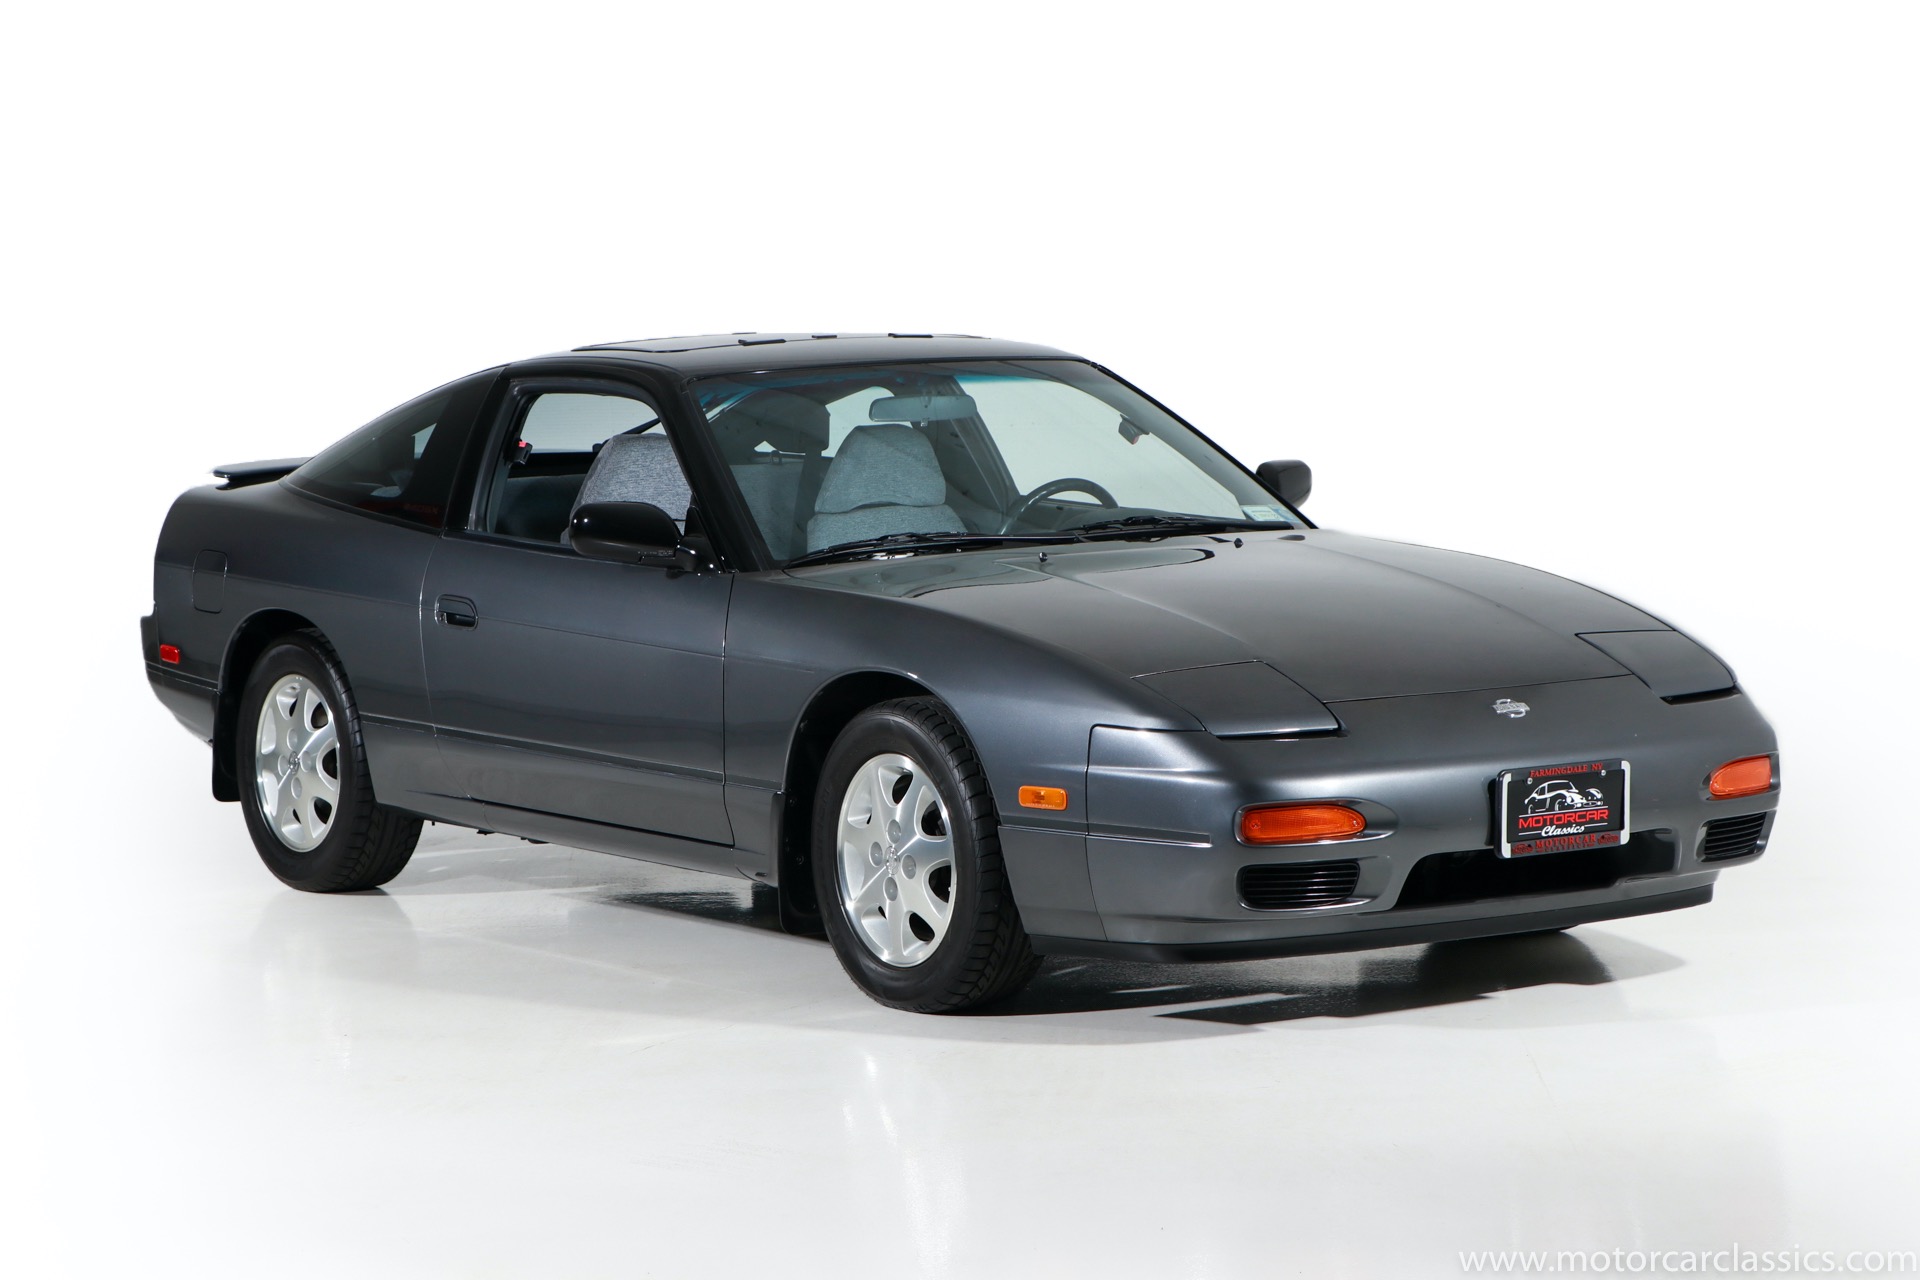 Used 1993 Nissan 240SX For Sale ($34,900) | Motorcar Classics Stock #1831